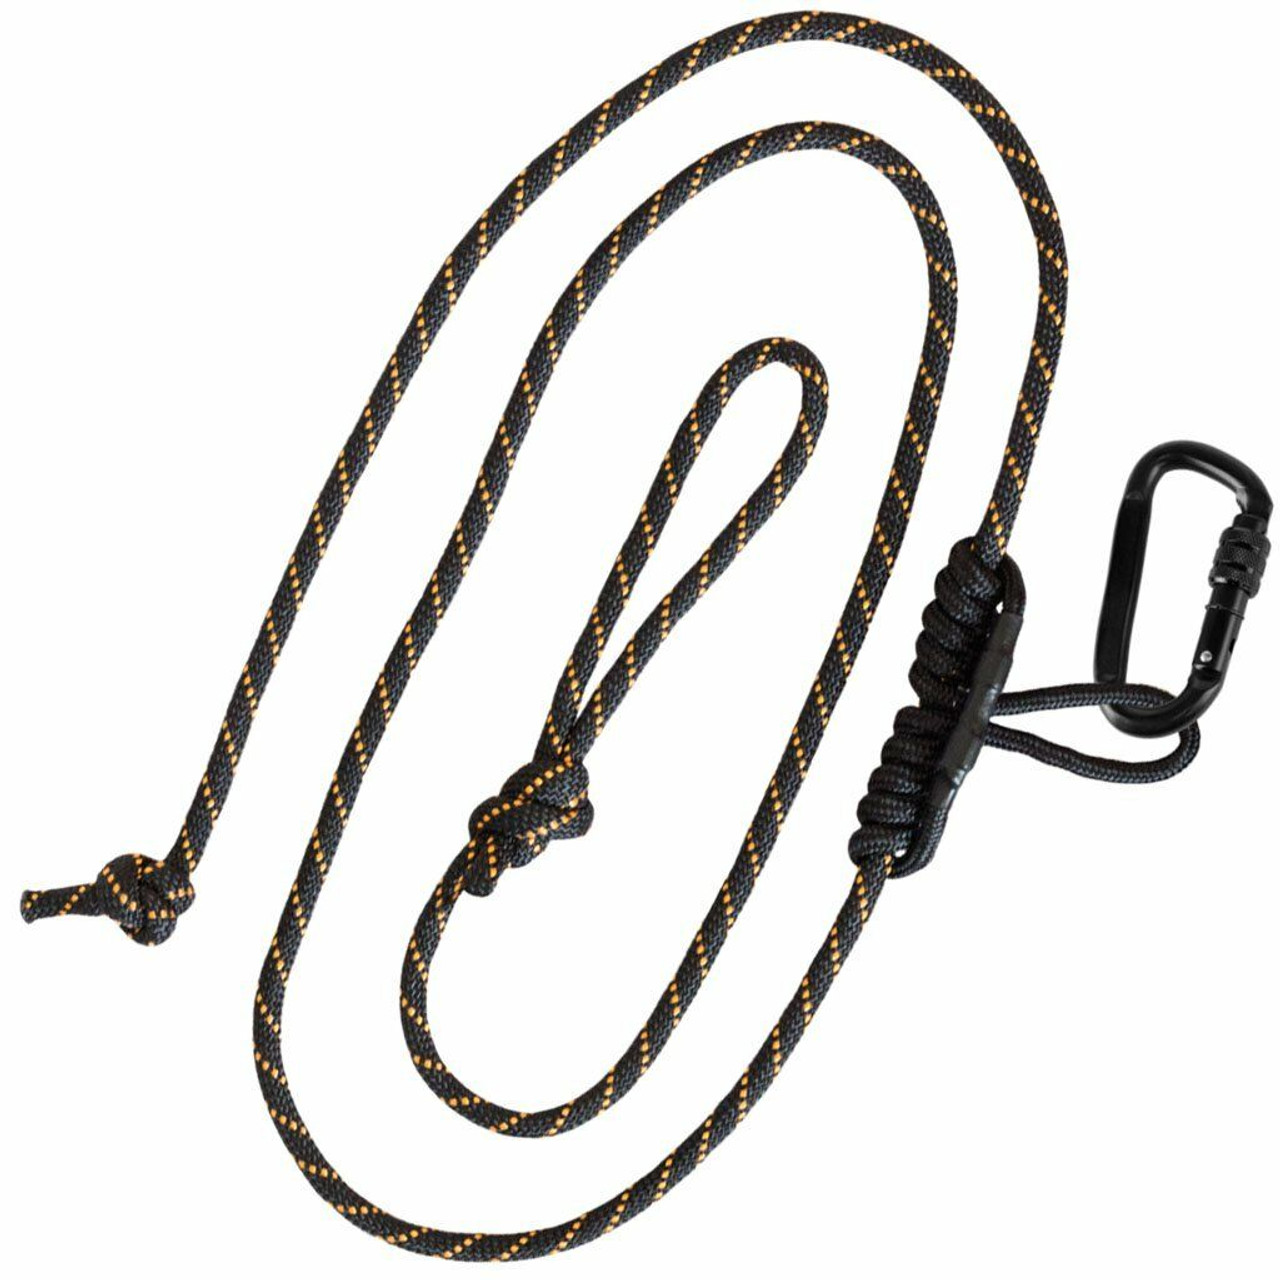 Muddy Outdoors The Safety Harness Lineman's Rope with Prusik Knot +  One-Handed Lockable Carabiner Combo - Mike's Archery